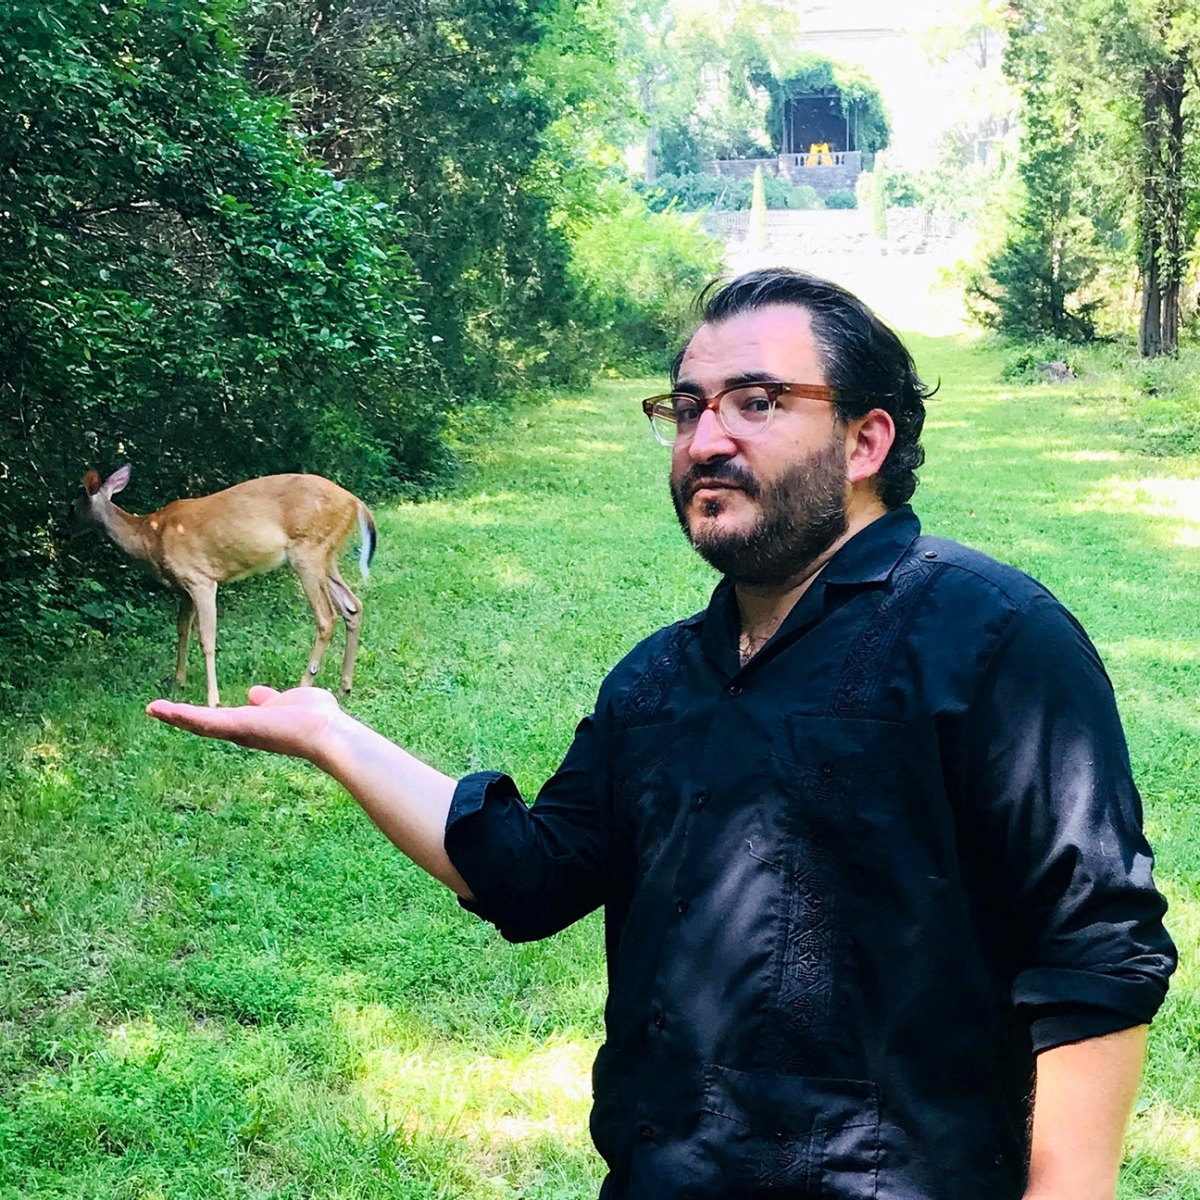 A photo of David foregrounding a deer with his palm out appearing to be holding a the deer.